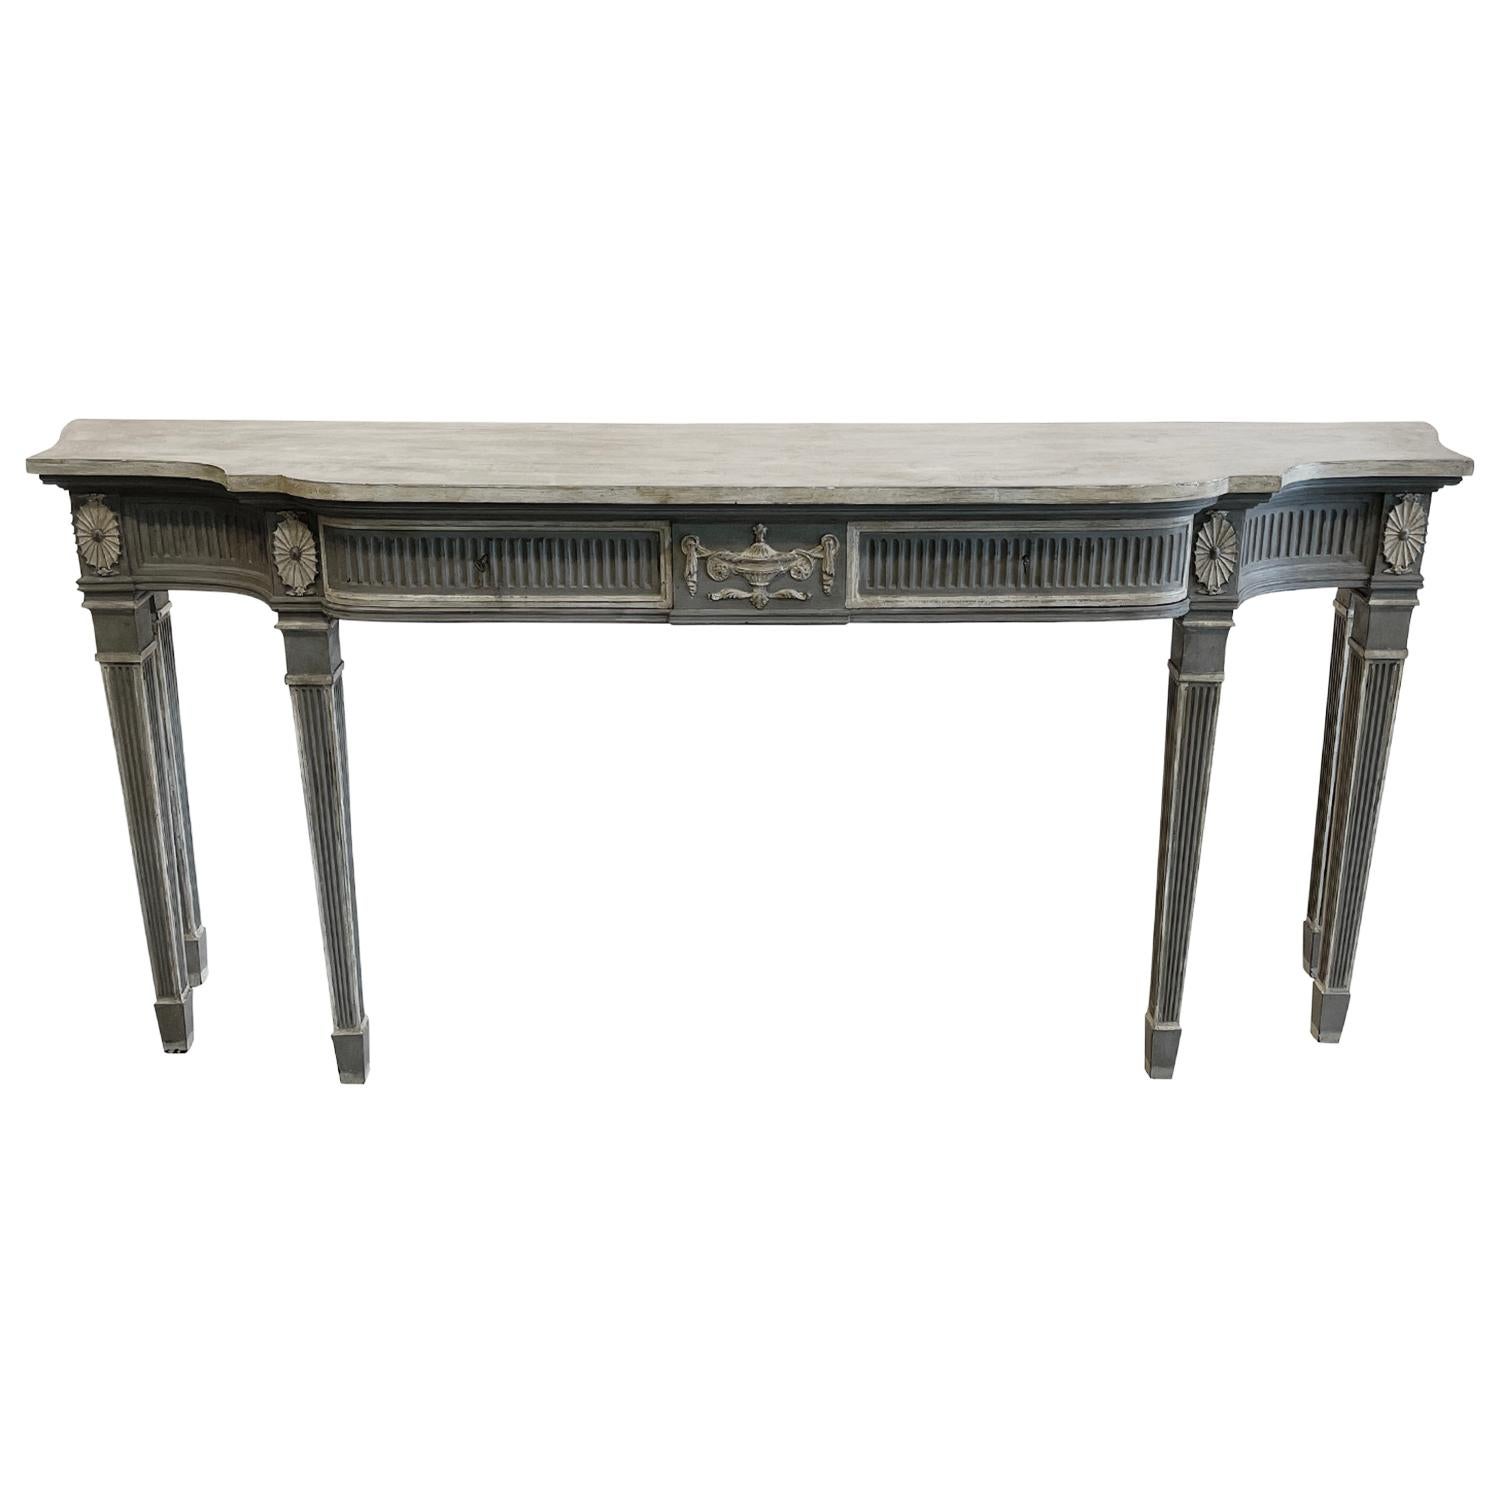 An 18th century style Scandinavian console table in a grey white finish, composed with its original brass hardware and key. The apron is centered with a classical urn and drapery tablet finish is carved from the solid plaque, in good condition.